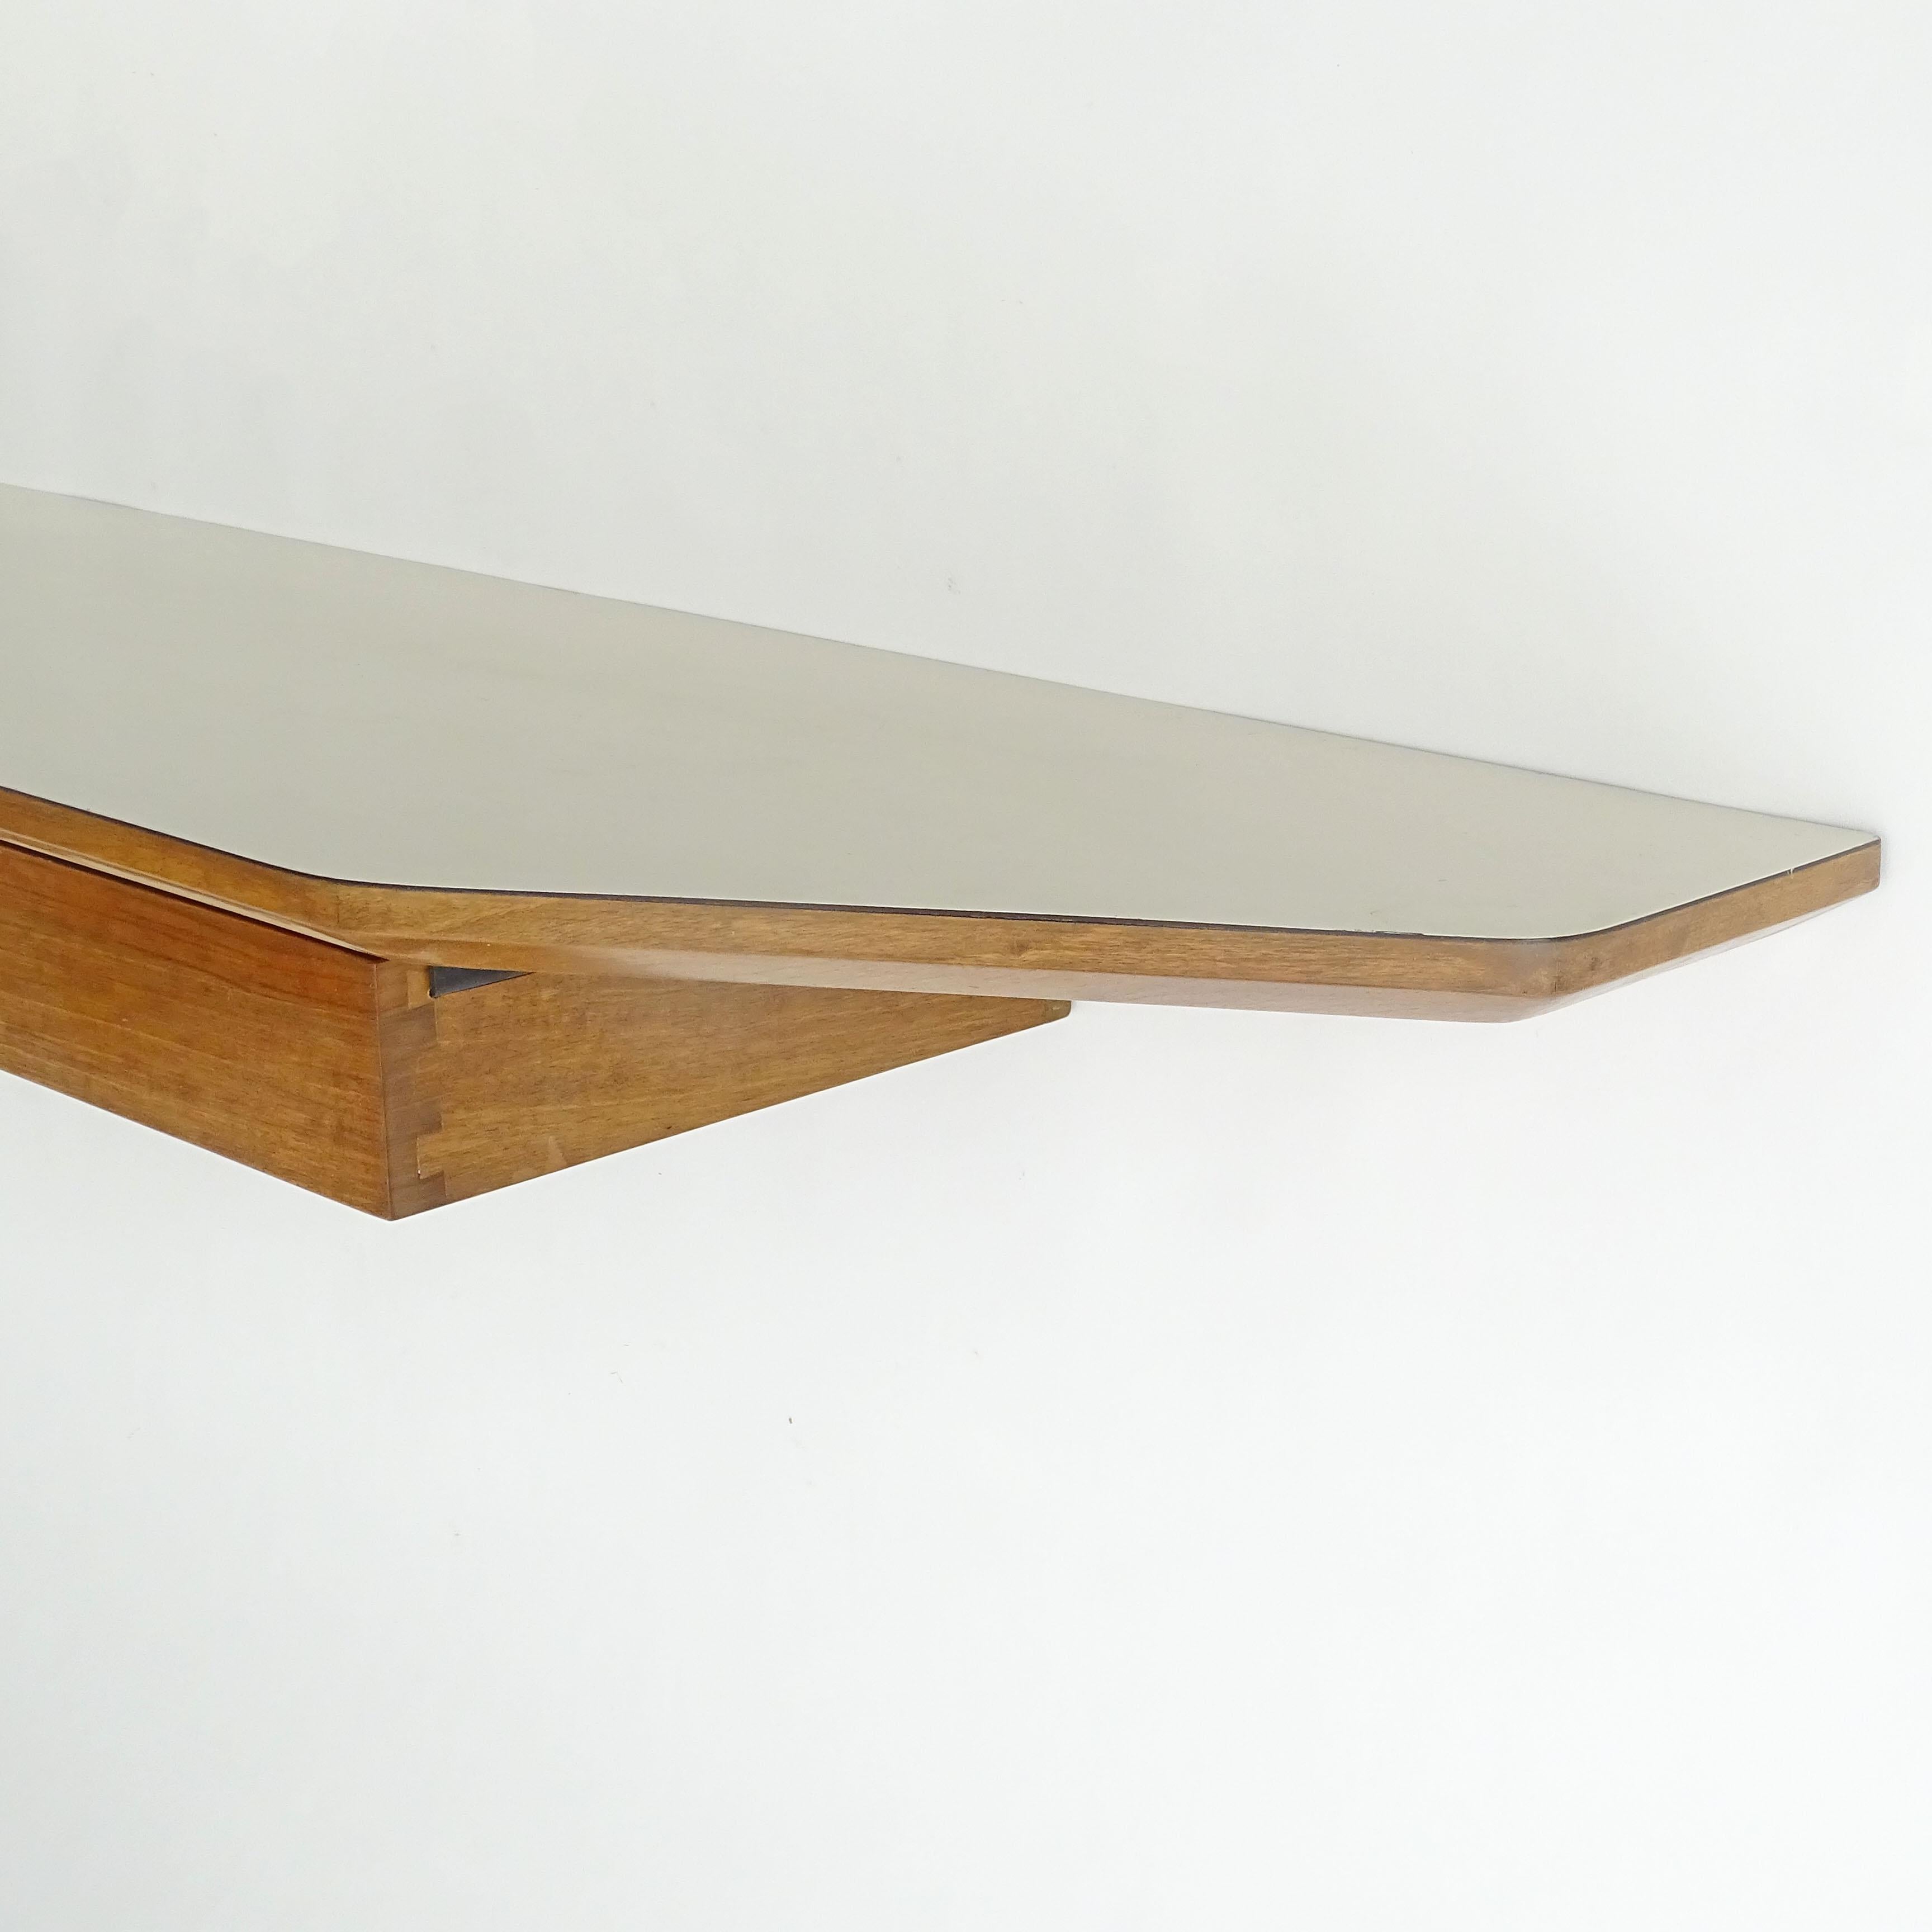 Sleek Osvaldo Borsani wall console with two drawers.
Held to the wall with wall brackets.
